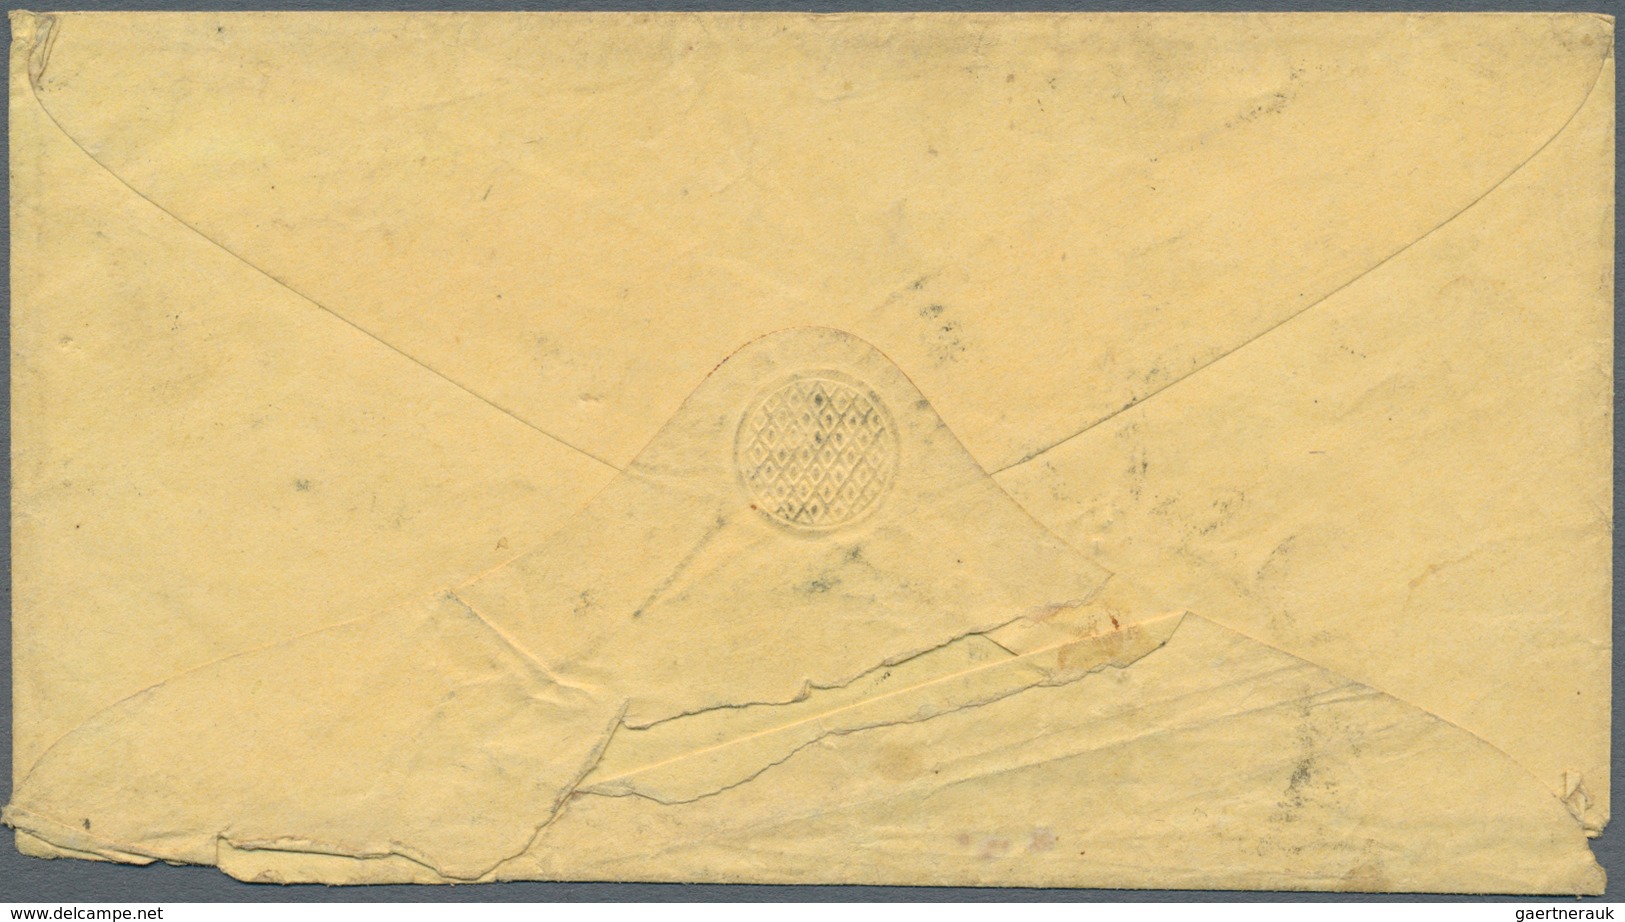 Vereinigte Staaten Von Amerika - Stampless Covers: 1863, Cover With Postmark "HELD FOR POSTAGE" And - …-1845 Vorphilatelie